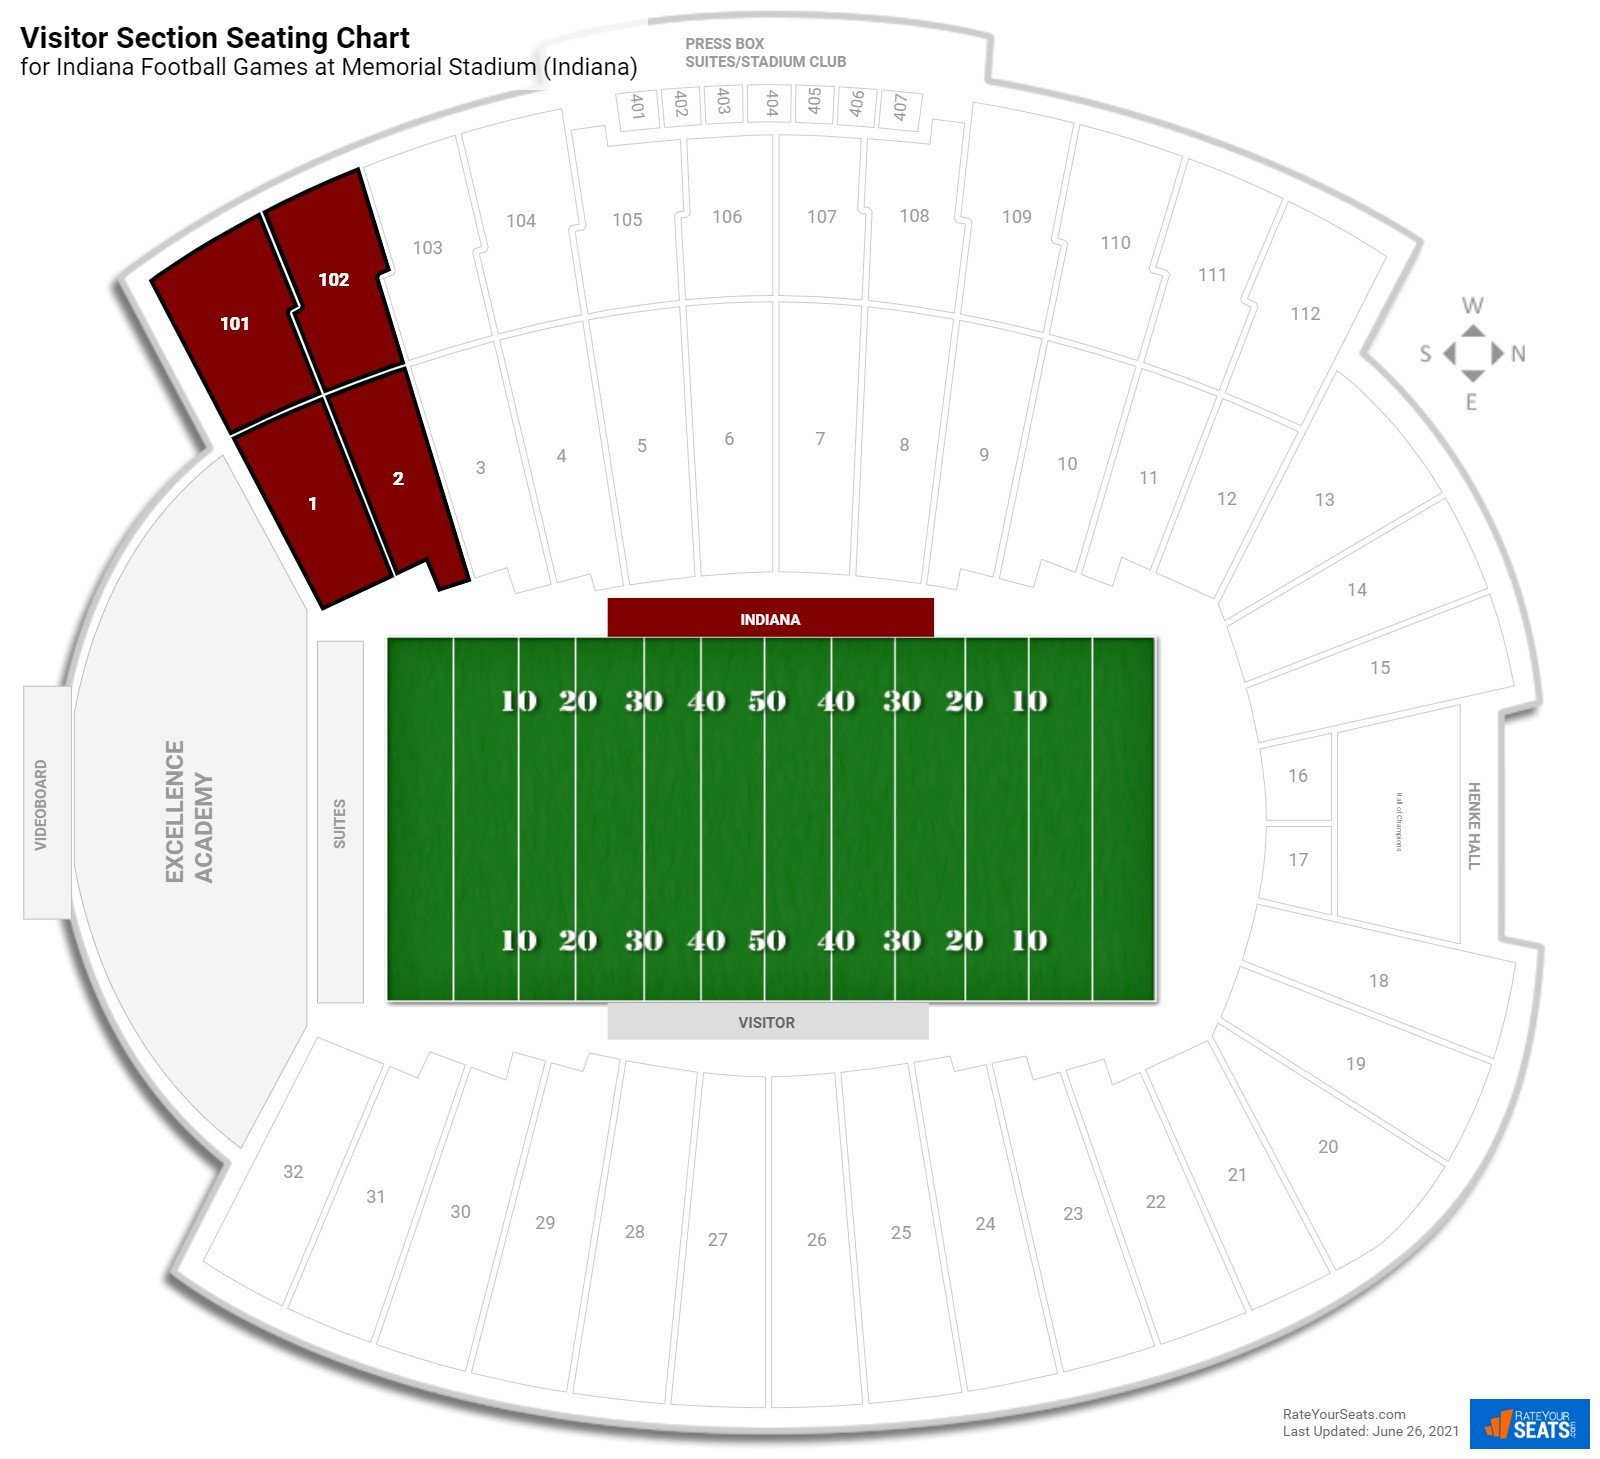 Indiana Visitor Section Seating Chart at Memorial Stadium (Indiana)